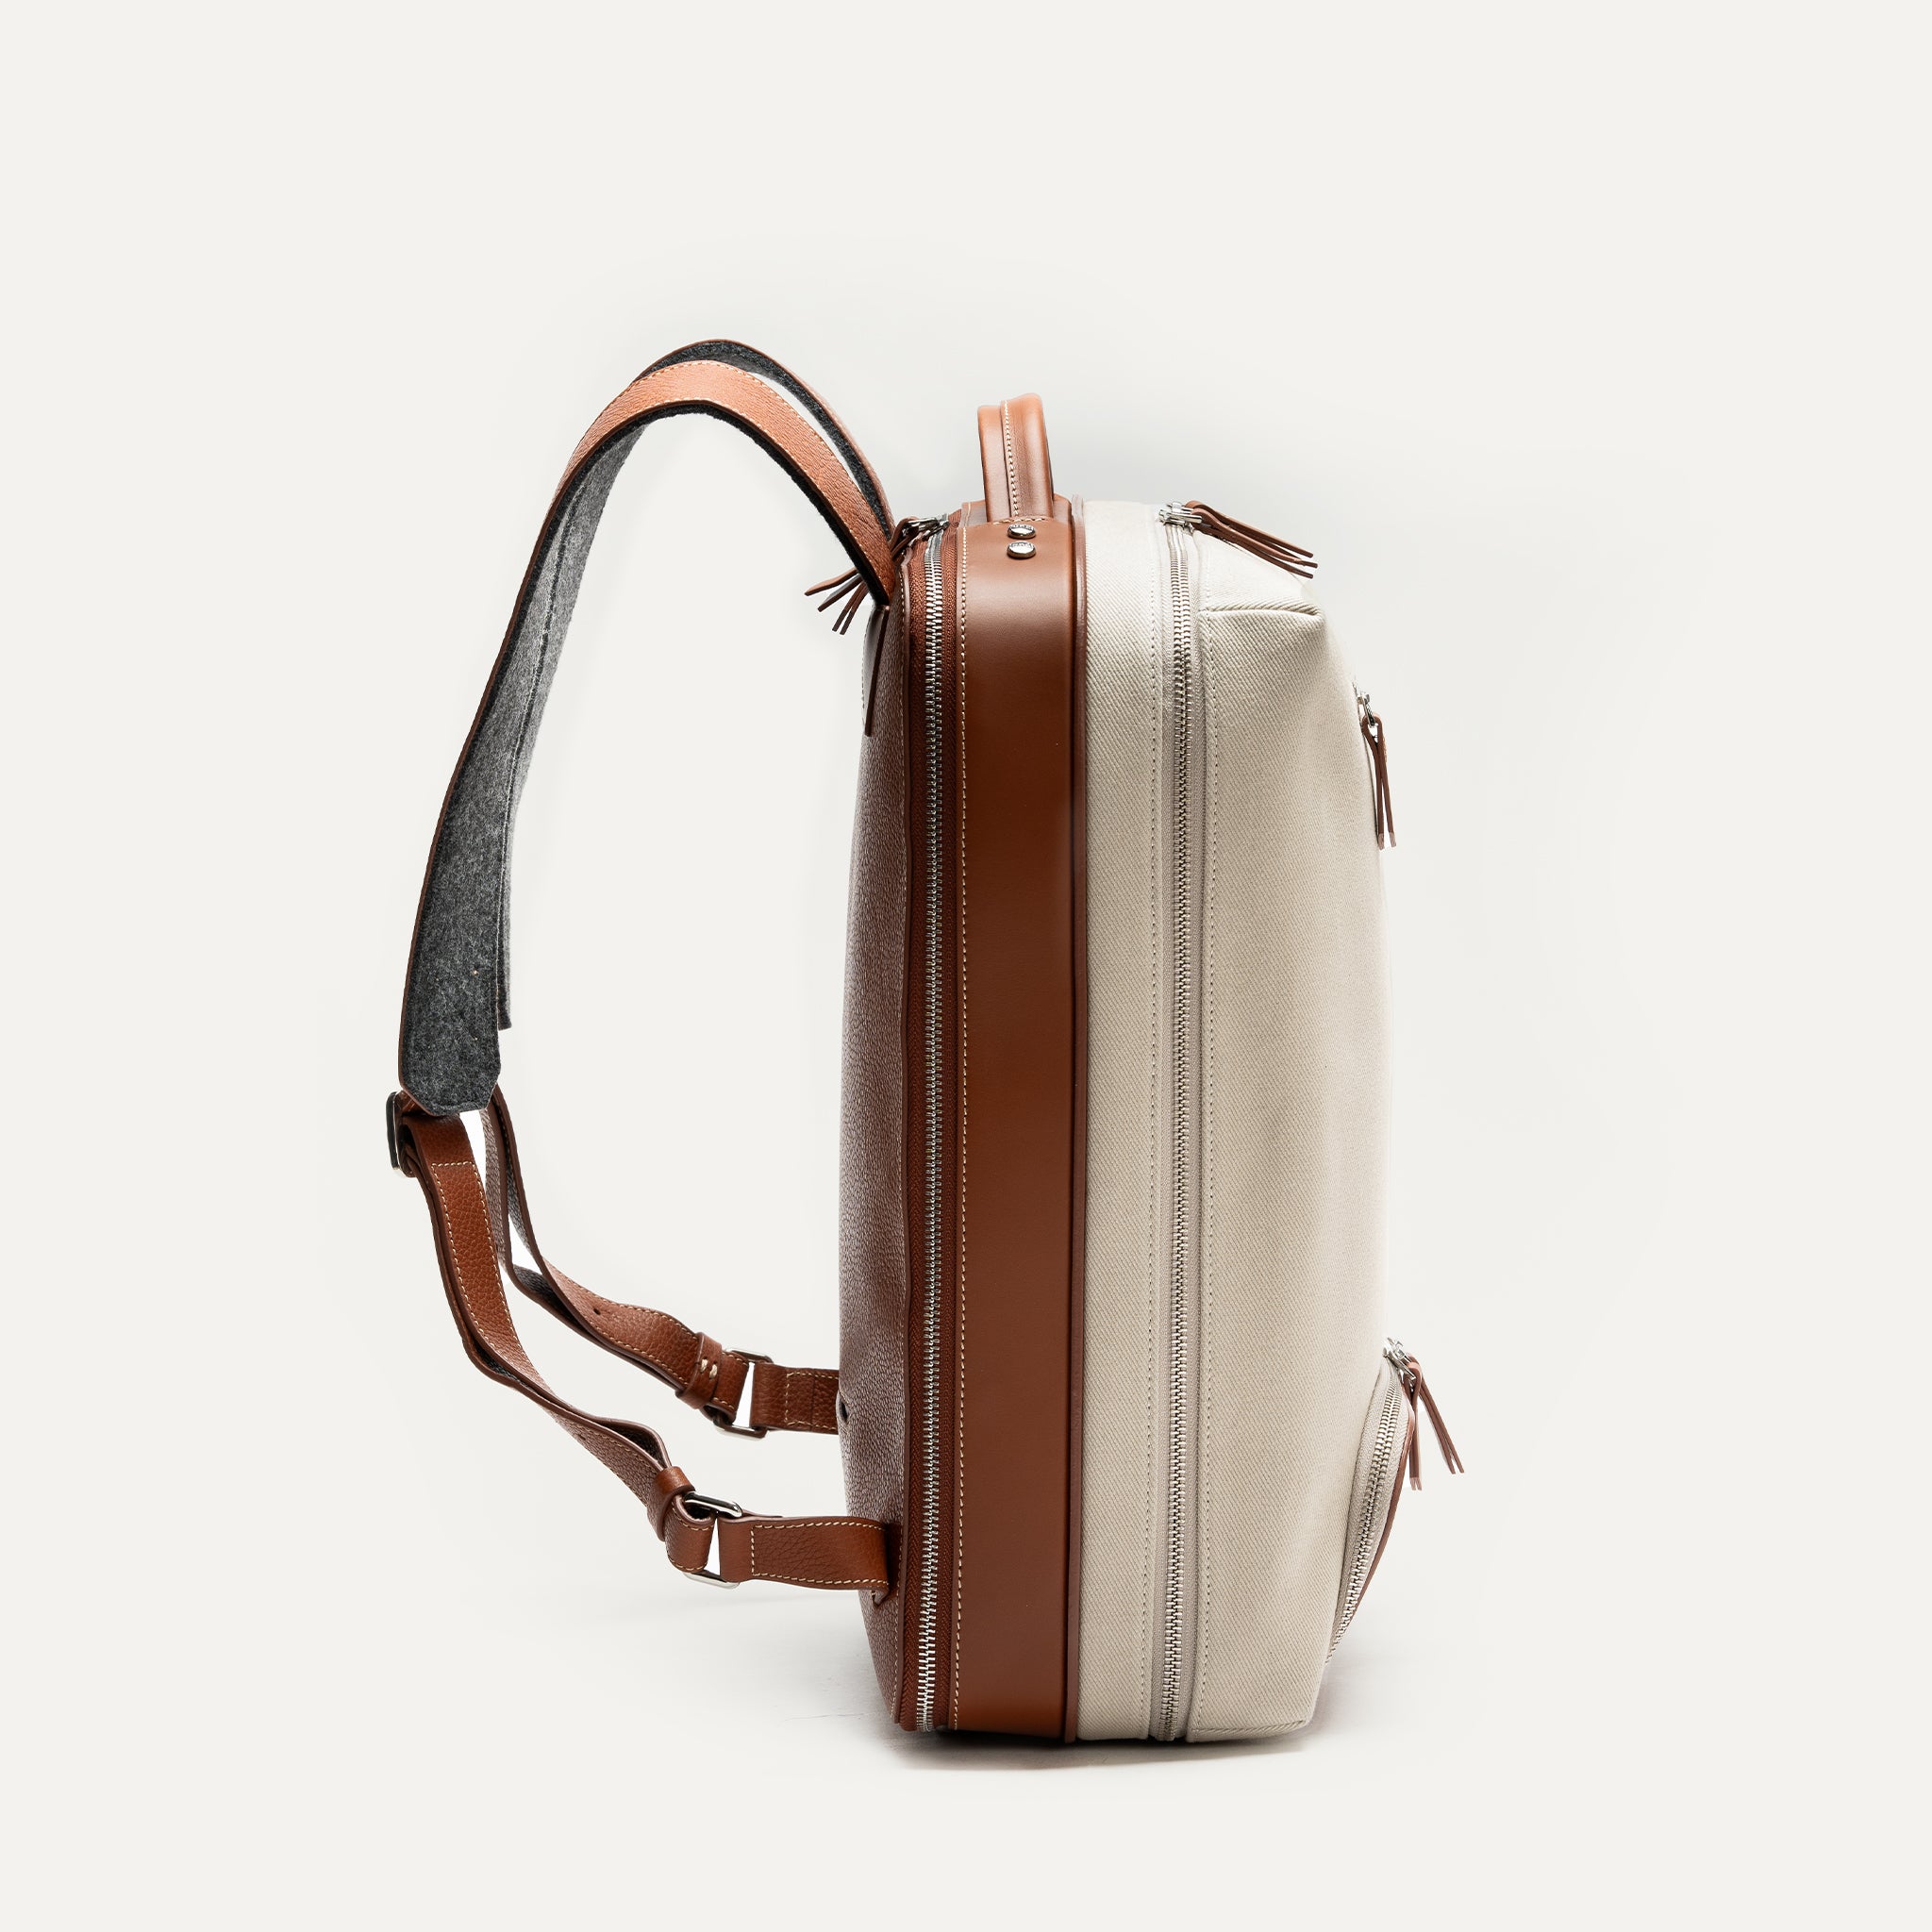 ANTOINE, Sand | lundi 36-hour Backpack in cotton and leather